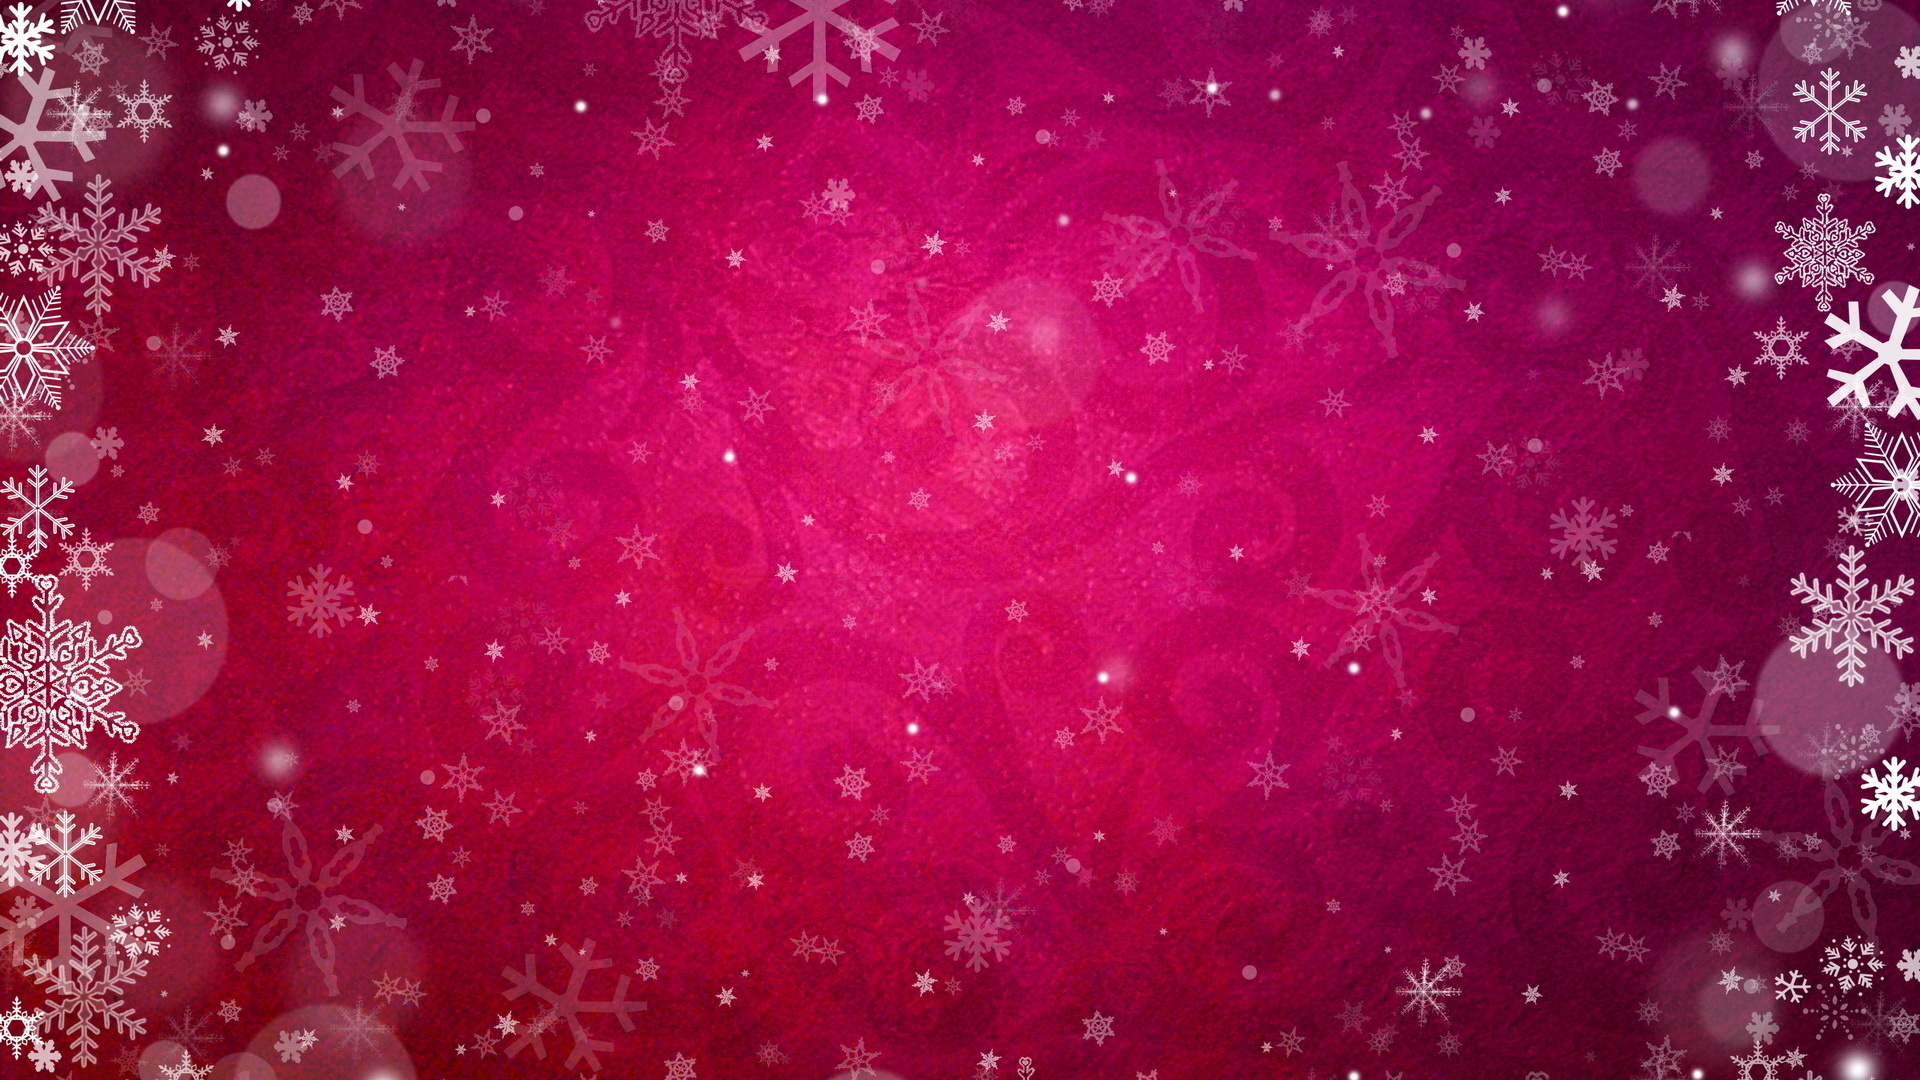 pink images for christmas, snow background